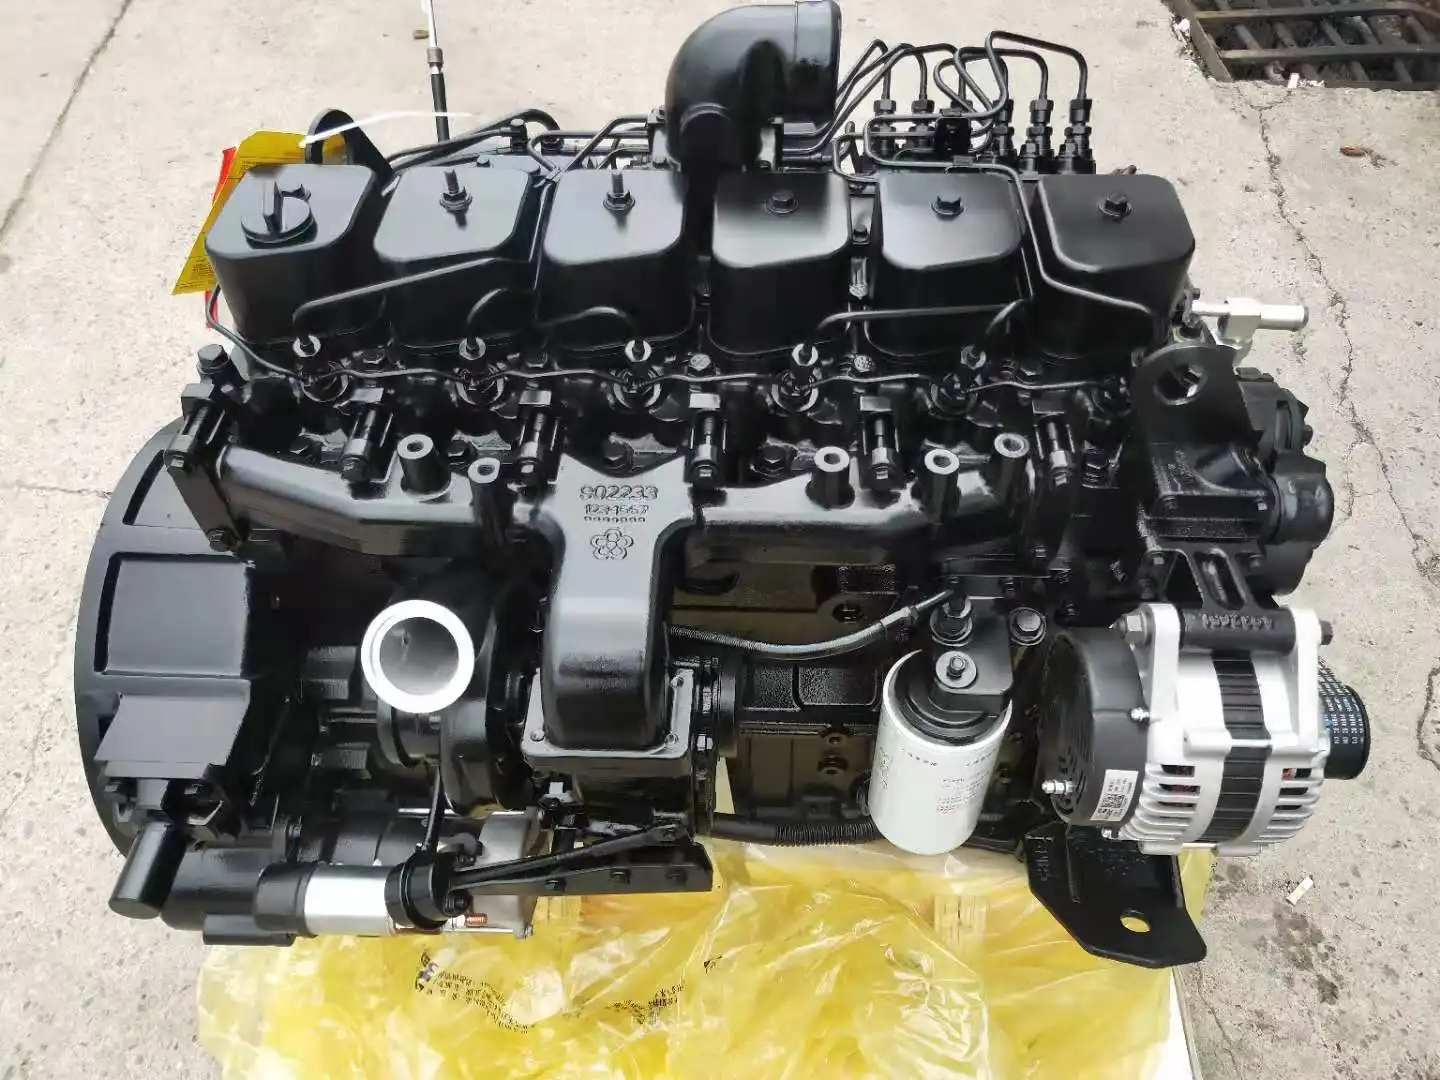 Hot sale low price bus truck mechanical pump engine assembly Dongfeng Cummins 5.9L EQB210 New in stock 6 cylinder diesel engine